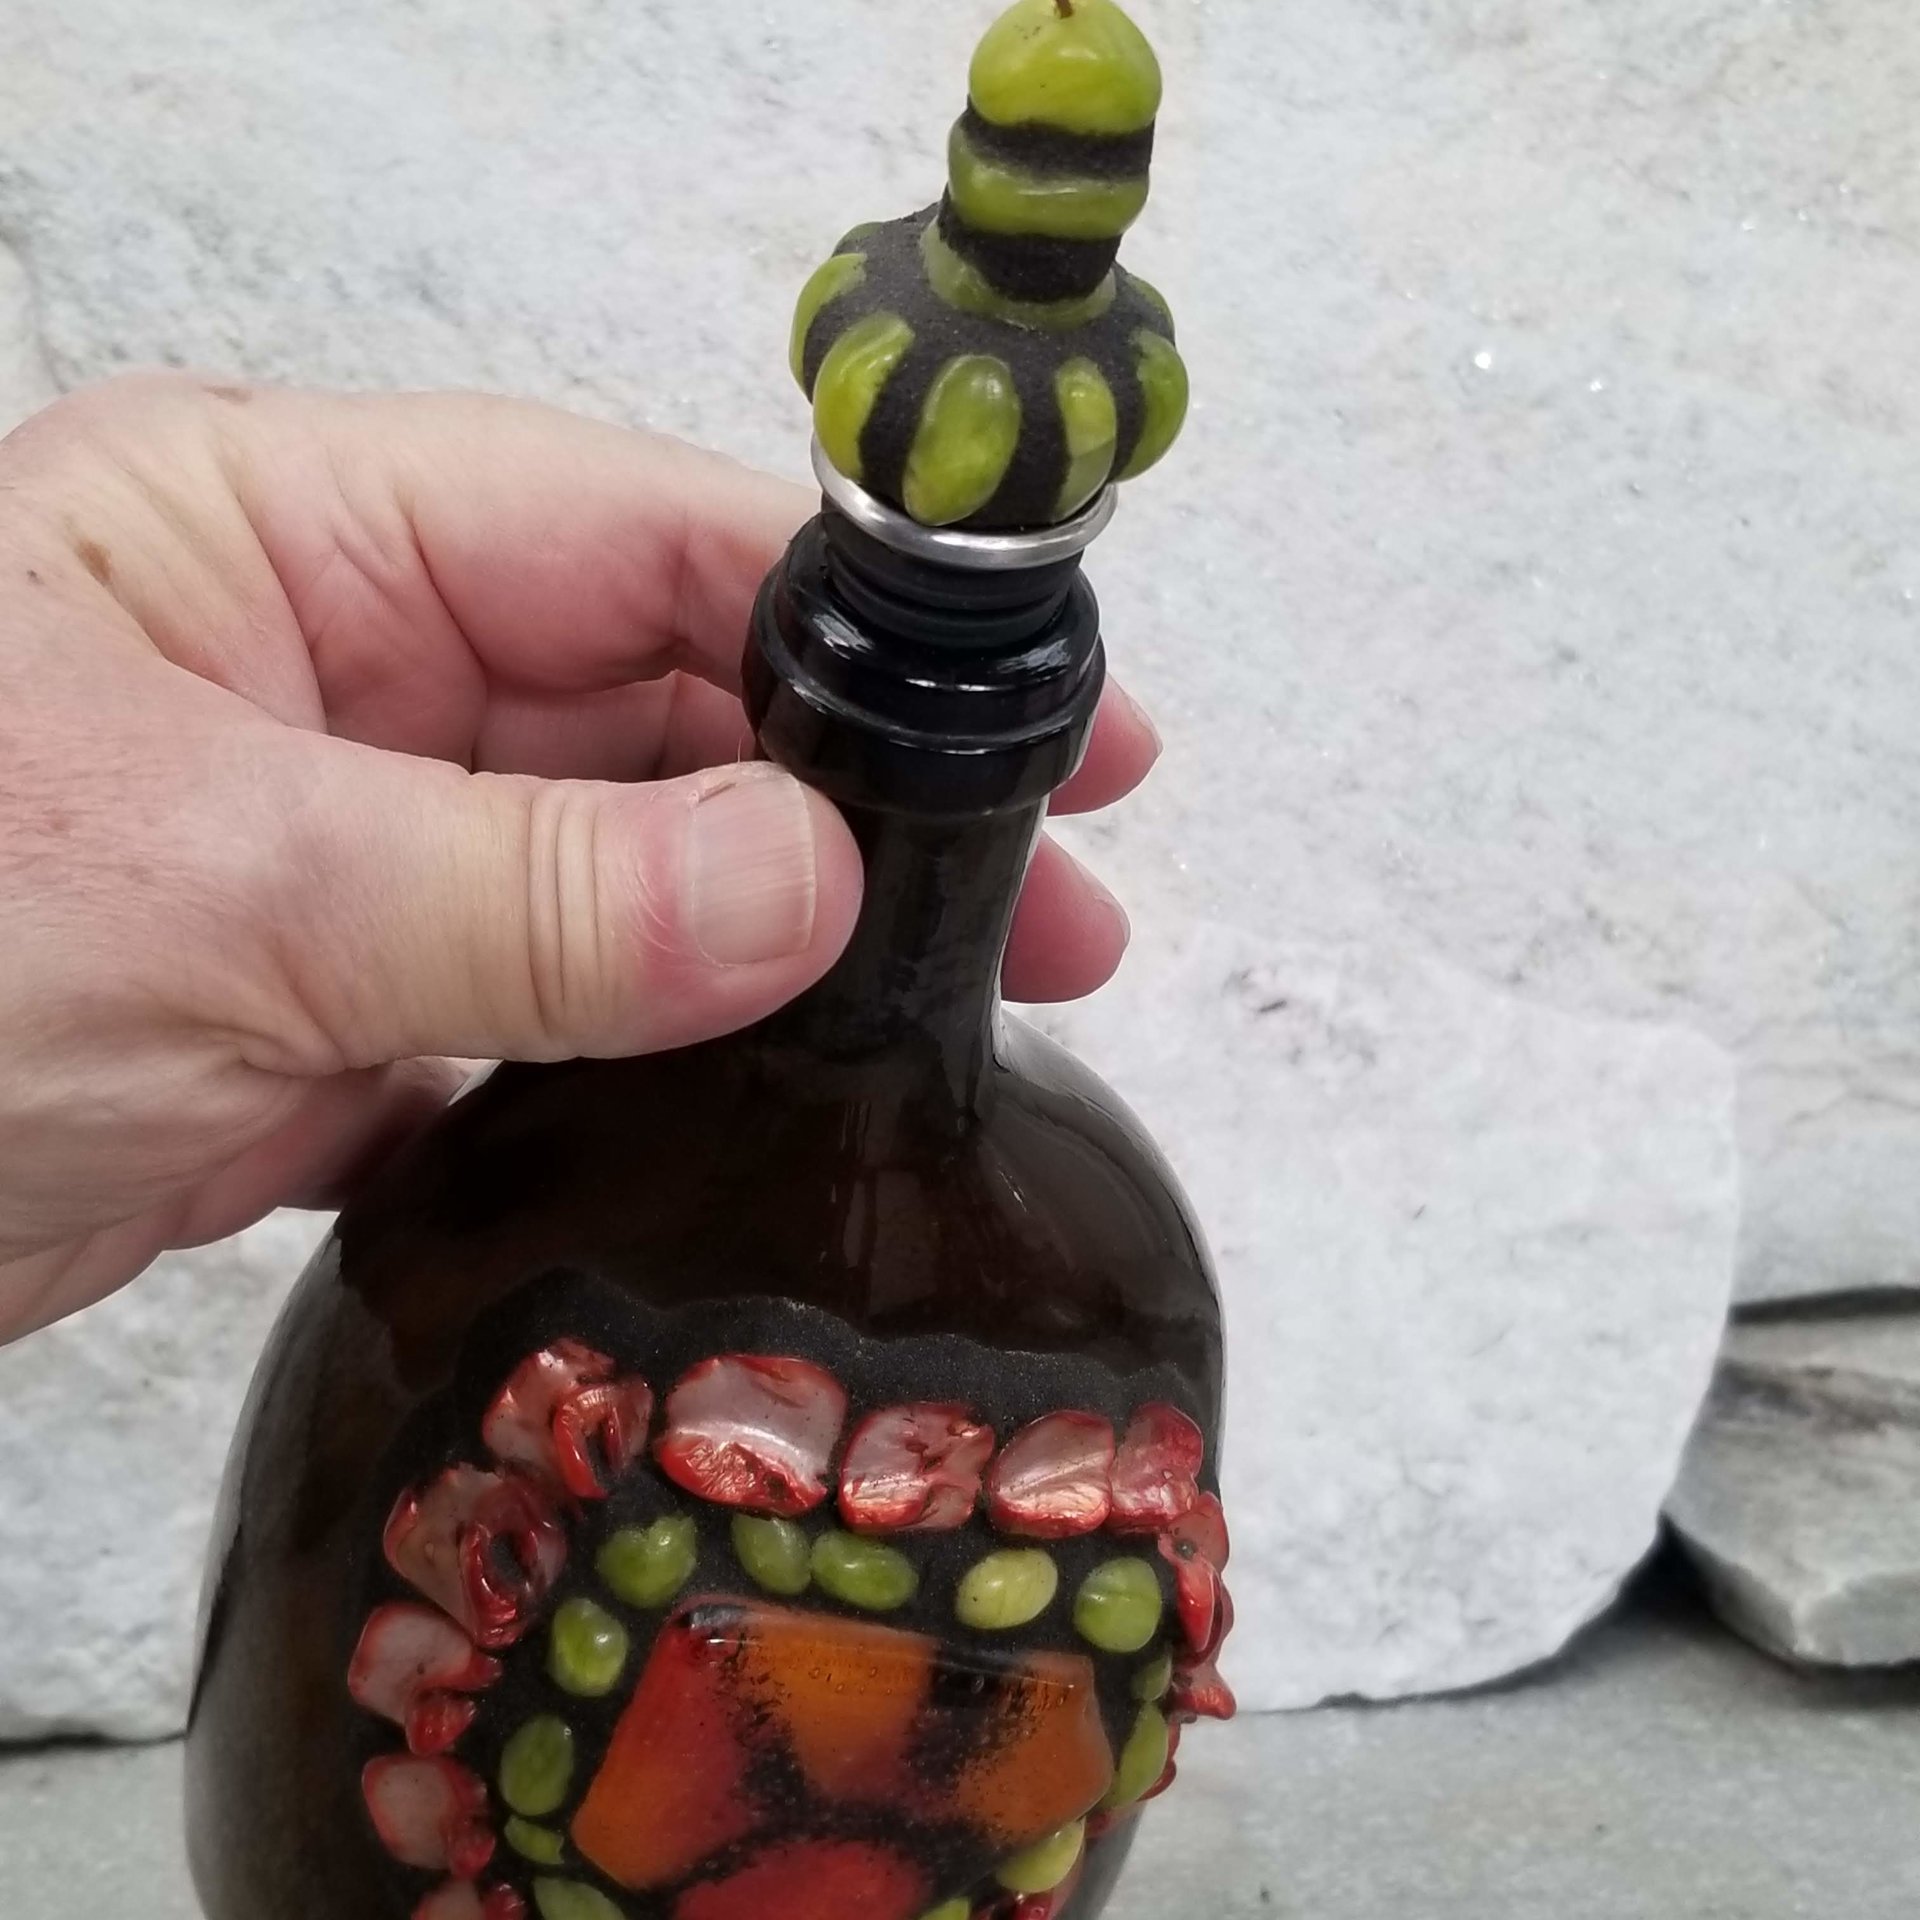 Mosaic Liquor Bottle “Little Brown” Up-cycled Decanter